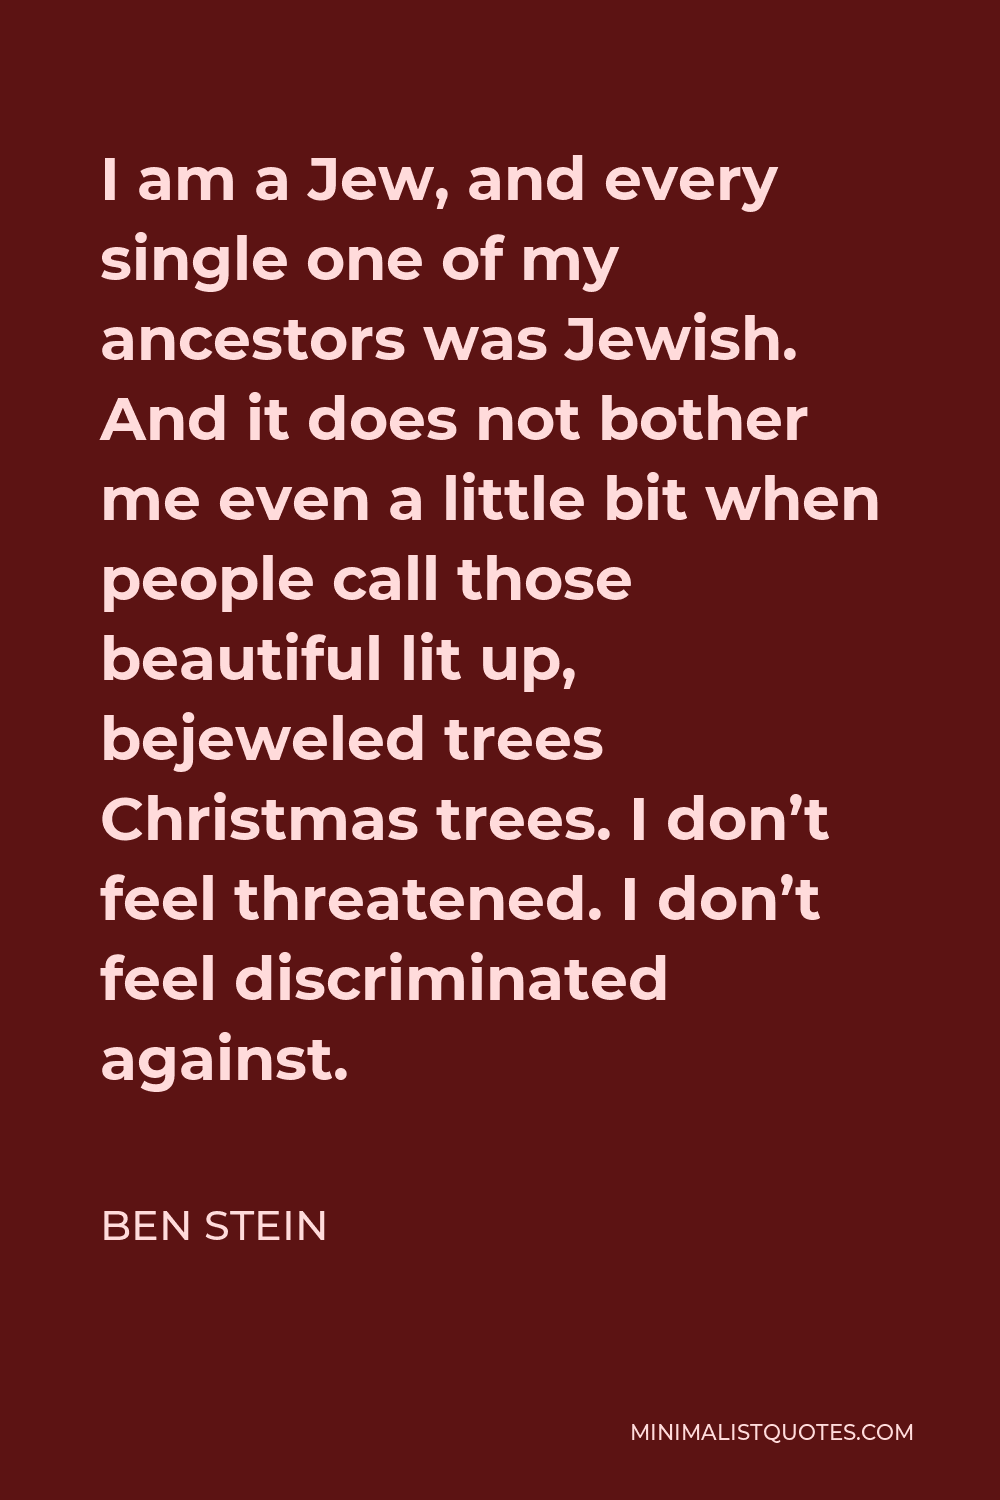 Ben Stein Quote - I am a Jew, and every single one of my ancestors was Jewish. And it does not bother me even a little bit when people call those beautiful lit up, bejeweled trees Christmas trees. I don’t feel threatened. I don’t feel discriminated against.